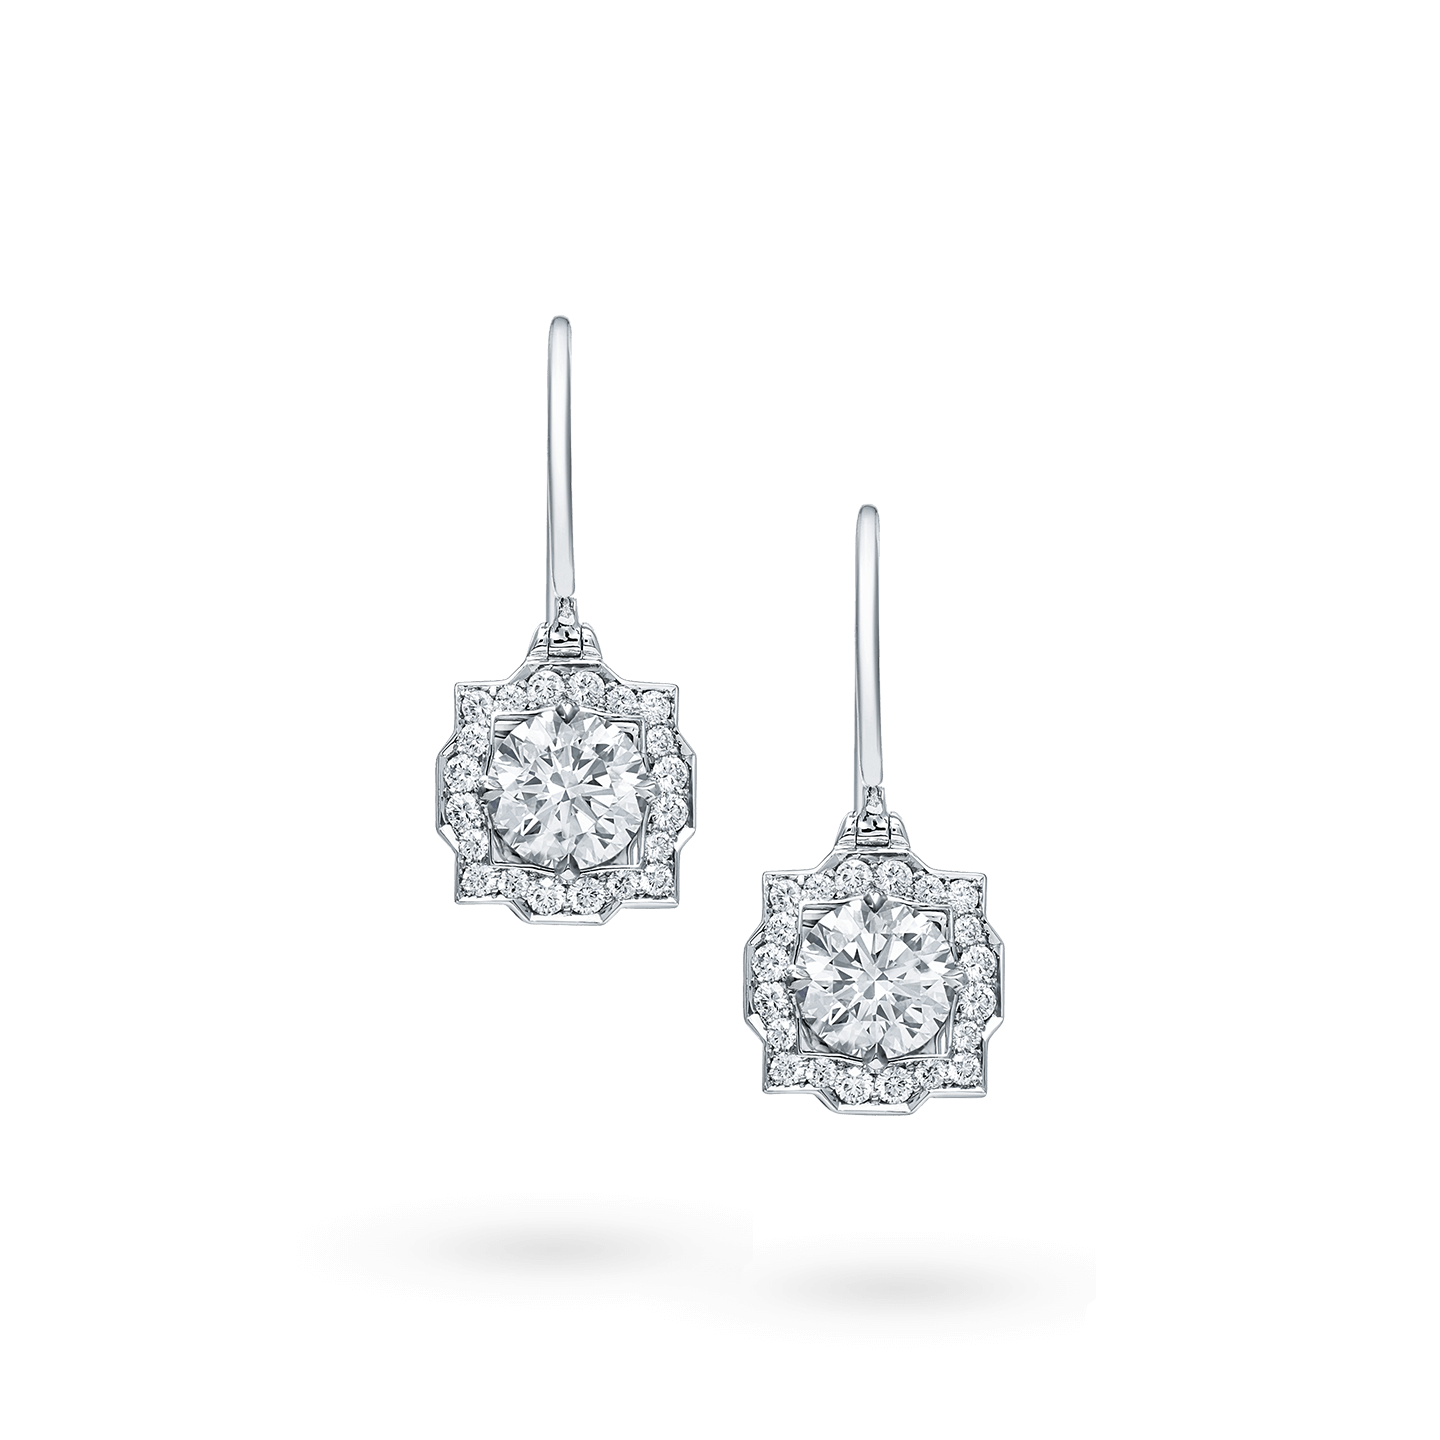 Belle Diamond Earstuds on Wires, Product Image 1